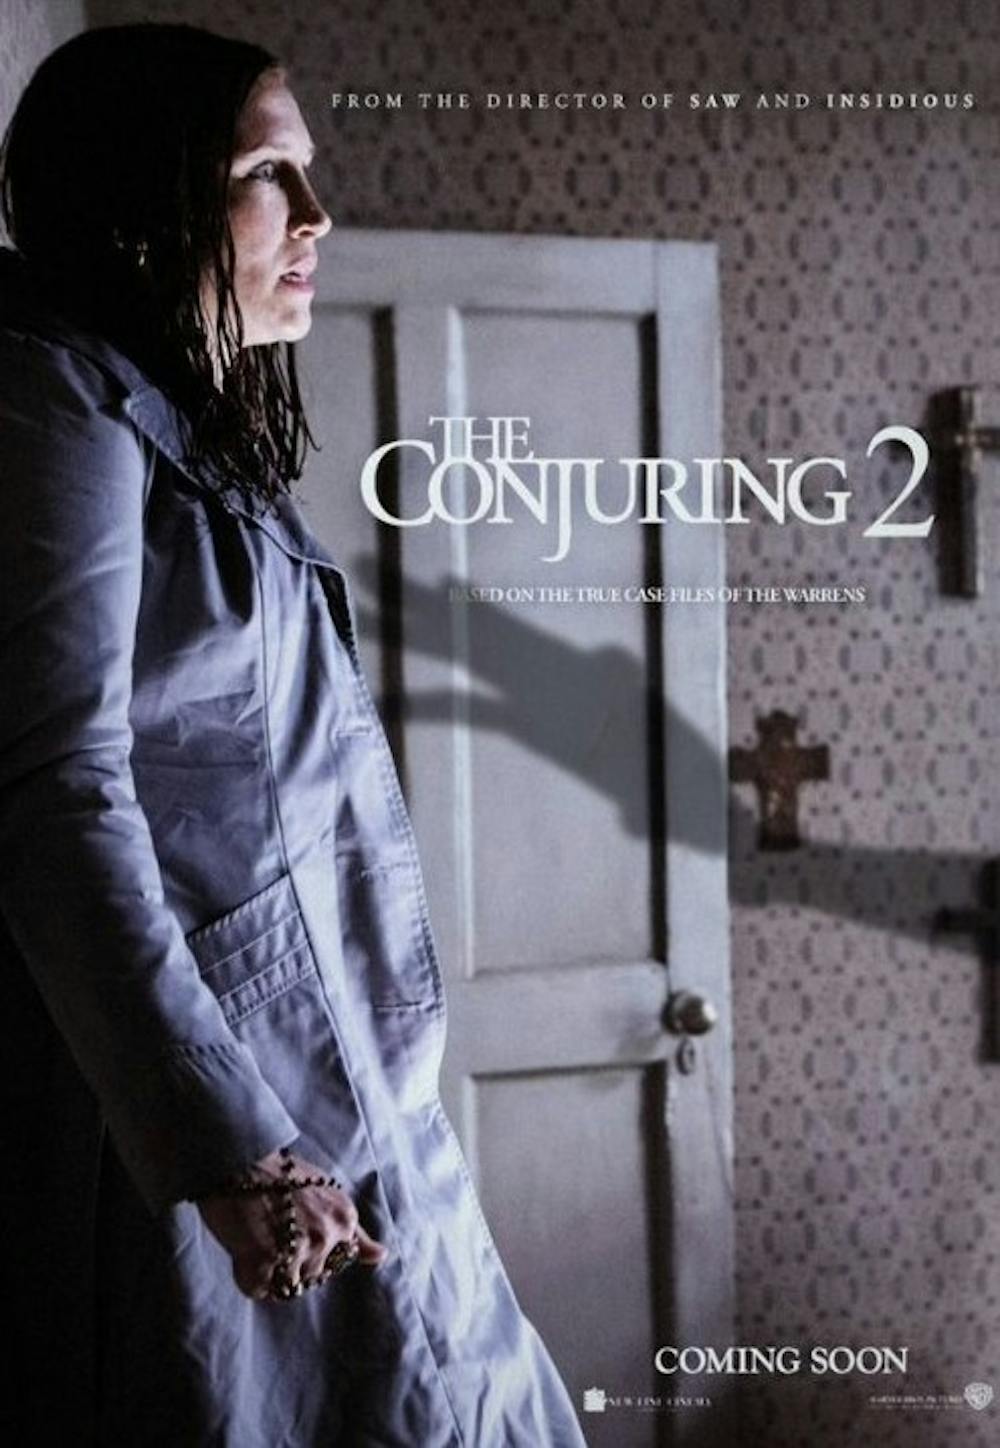 "The Conjuring 2" is more than just a scary movie.